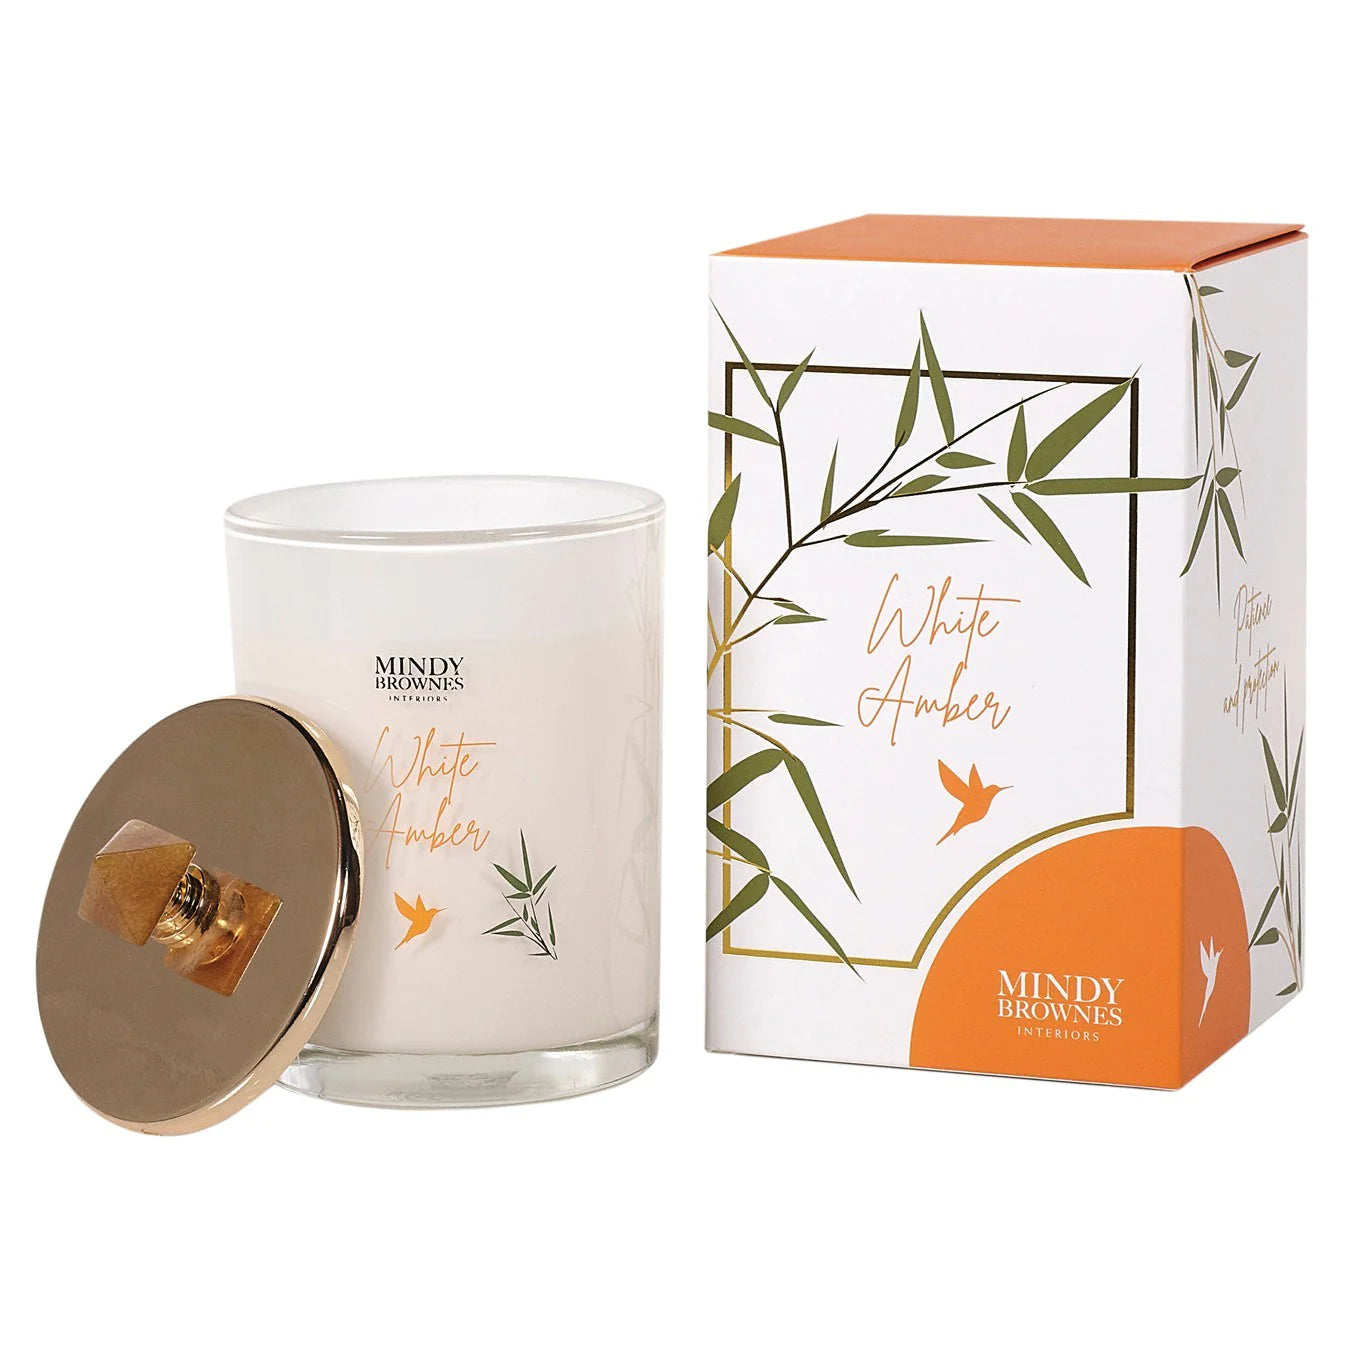 Mindy Brownes Scented Candles - White Amber